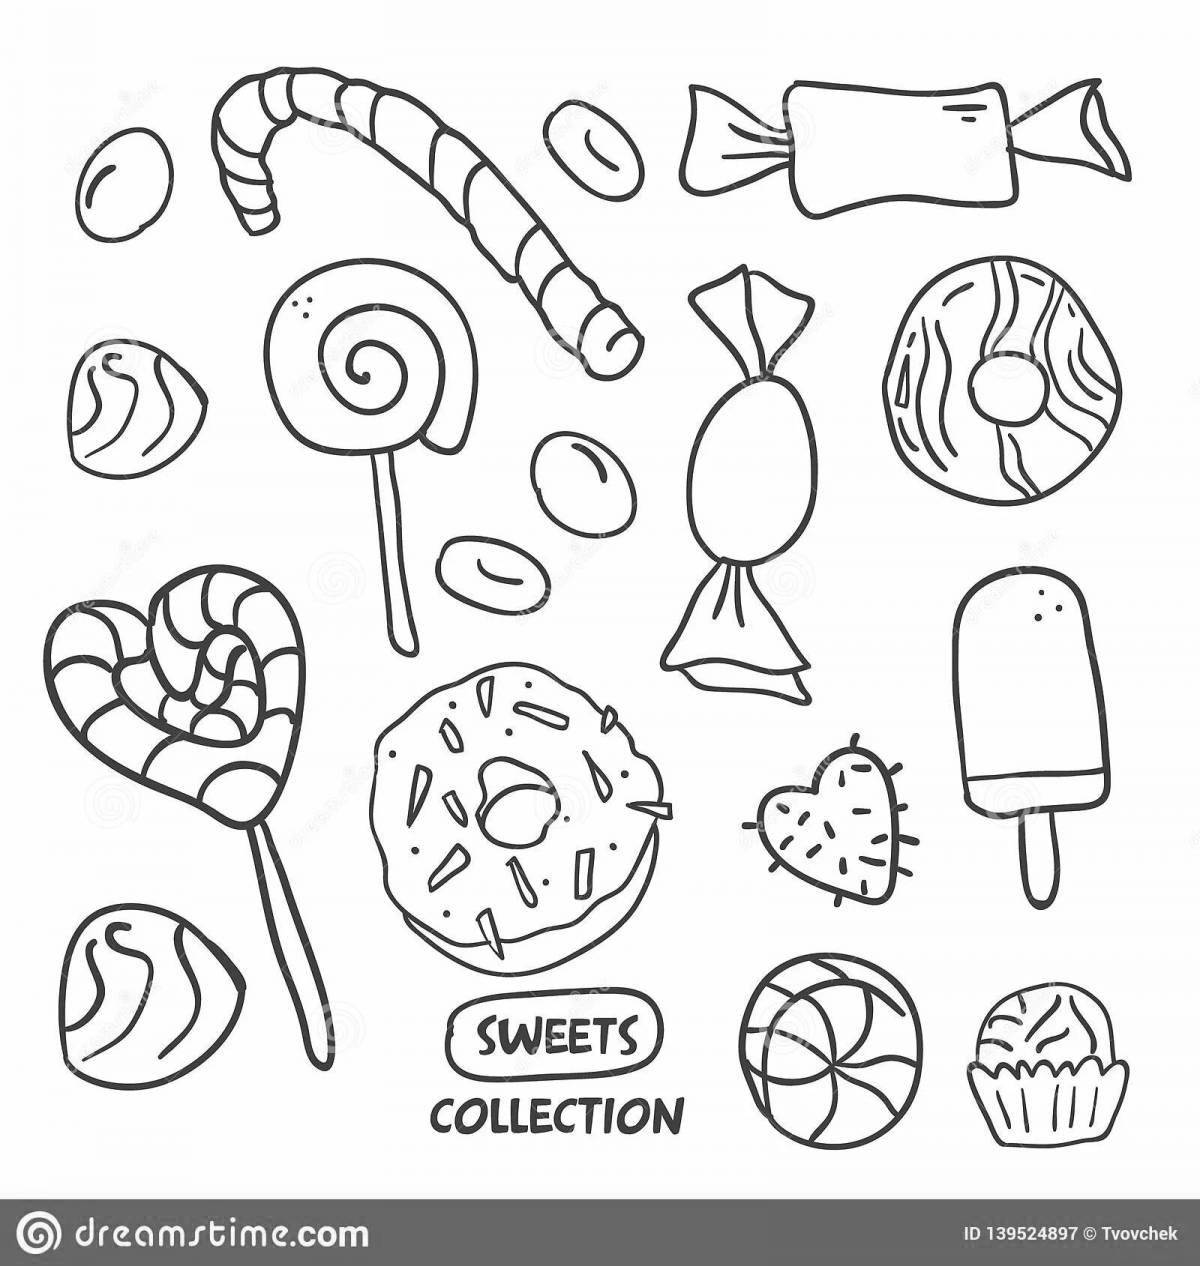 Charming marshmallow coloring book